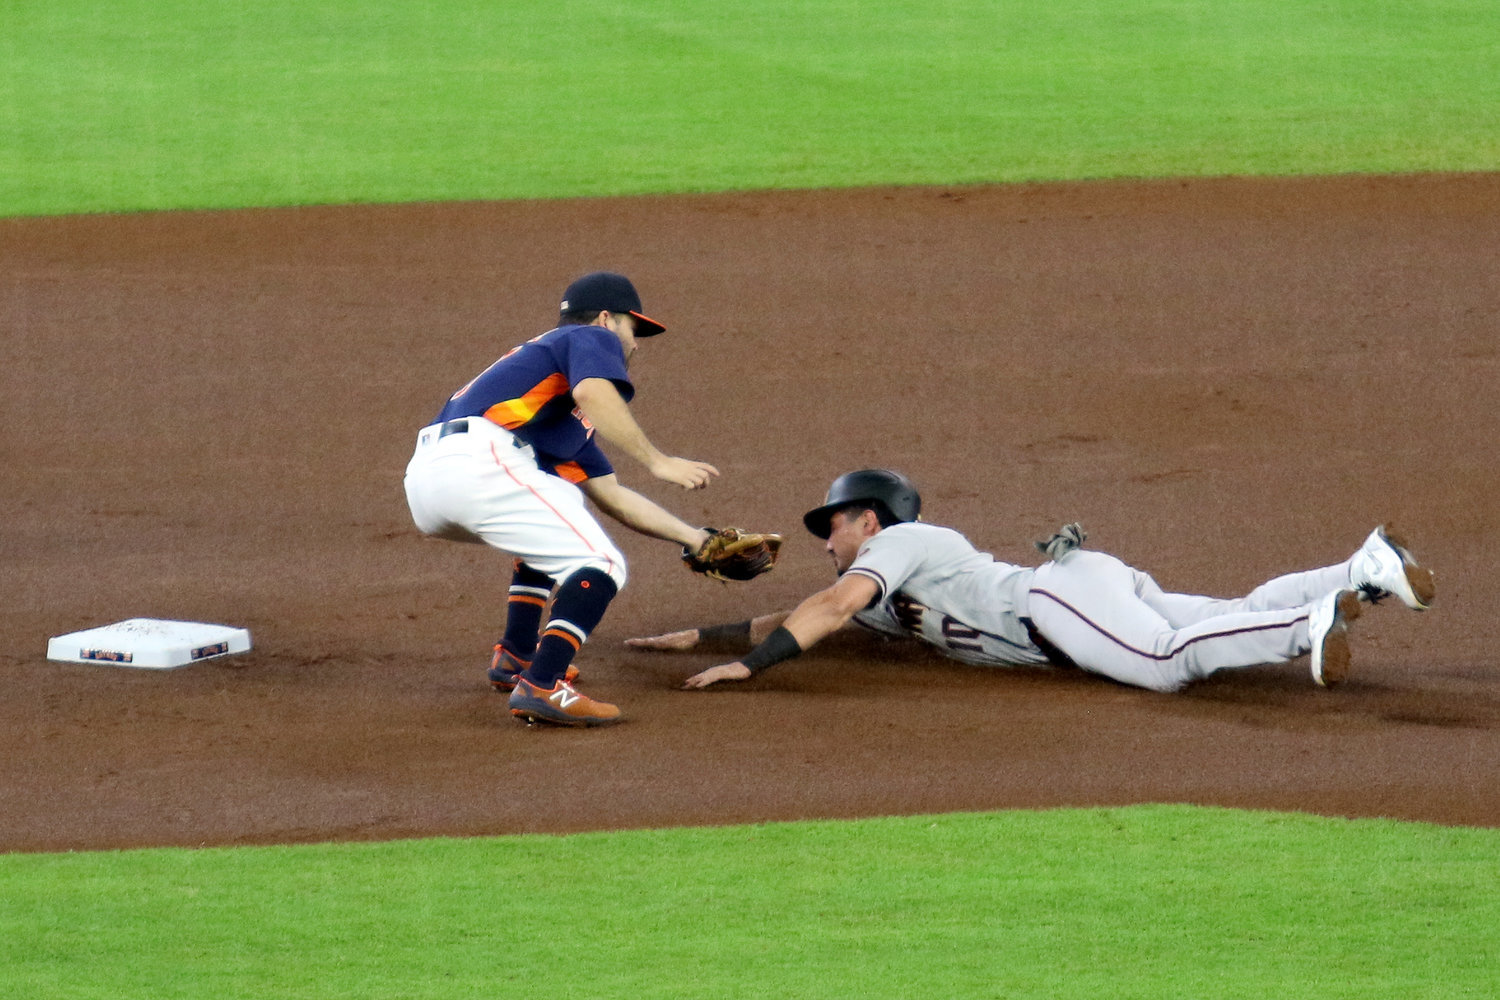 George Springer of the Houston Astros dives for home to score on an inside the park home run in the 6th inning of Sunday’s game against the Arizona Diamondbacks at Minute Maid Park. The Astros won 3-2.